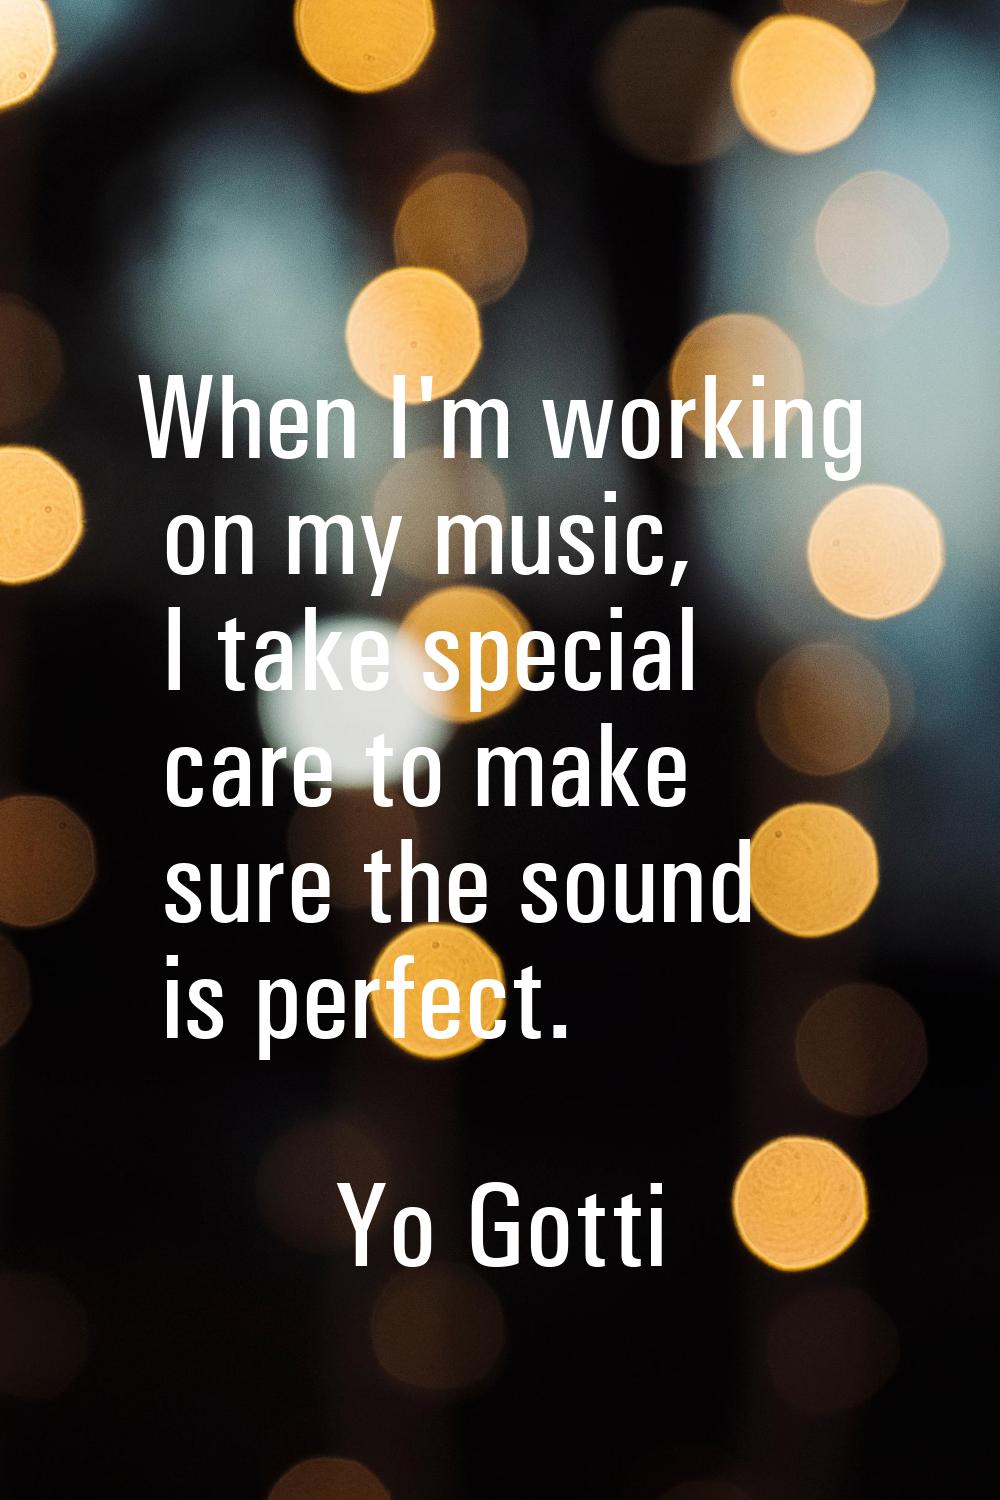 When I'm working on my music, I take special care to make sure the sound is perfect.